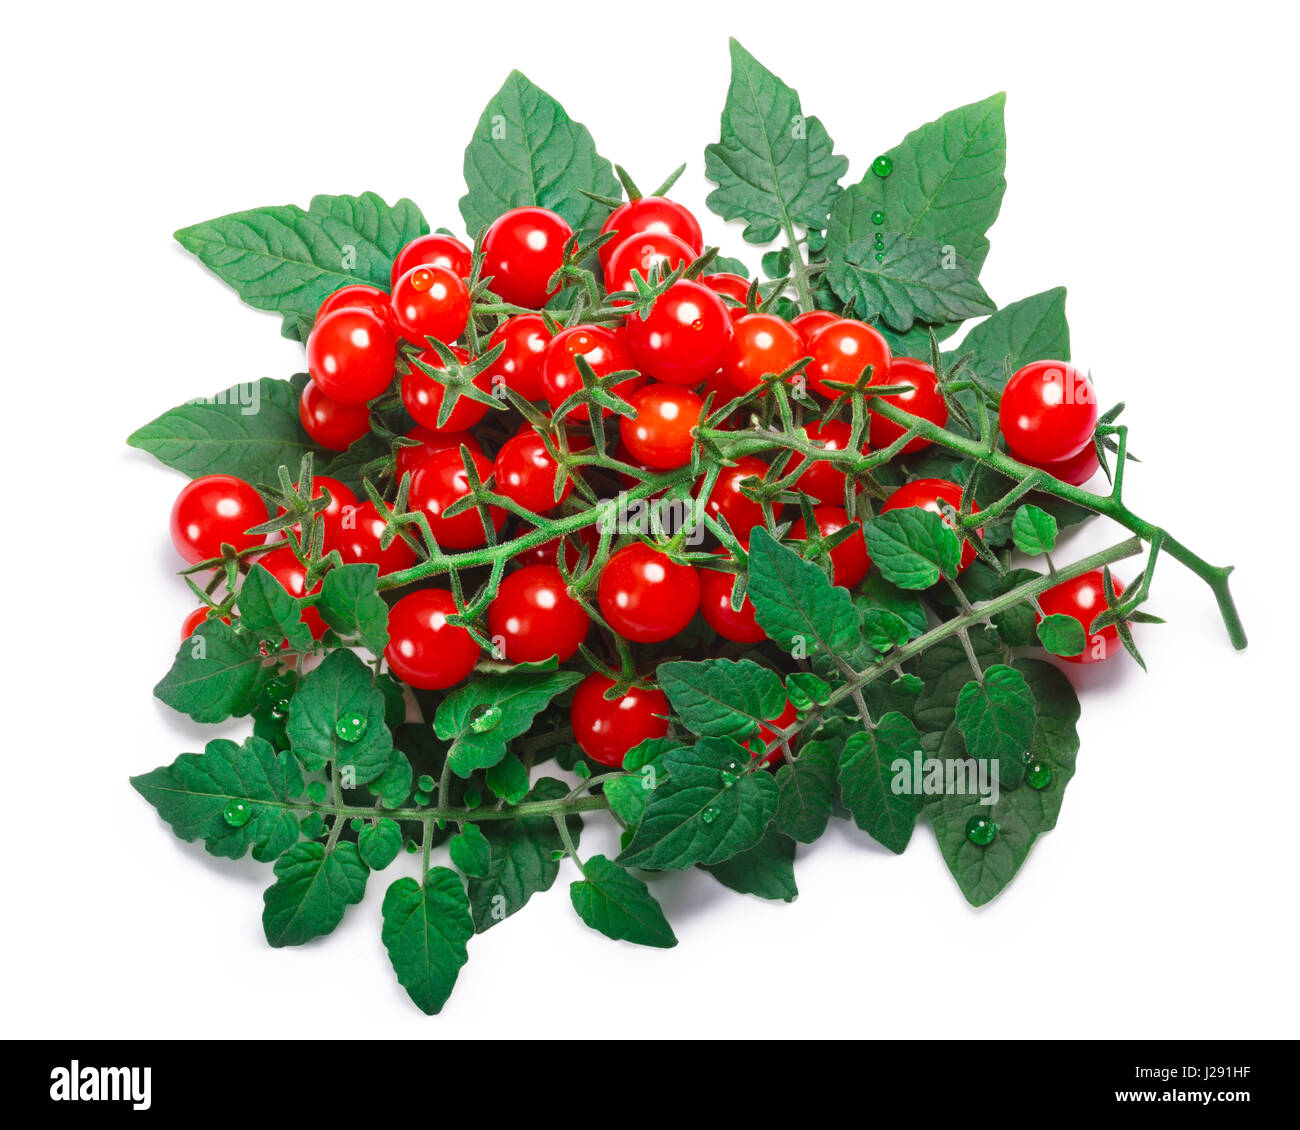 Currant sweet pea tomatoes (Solanum pimpinellifolium) with leaves. Clipping paths, shadow separated, top view Stock Photo